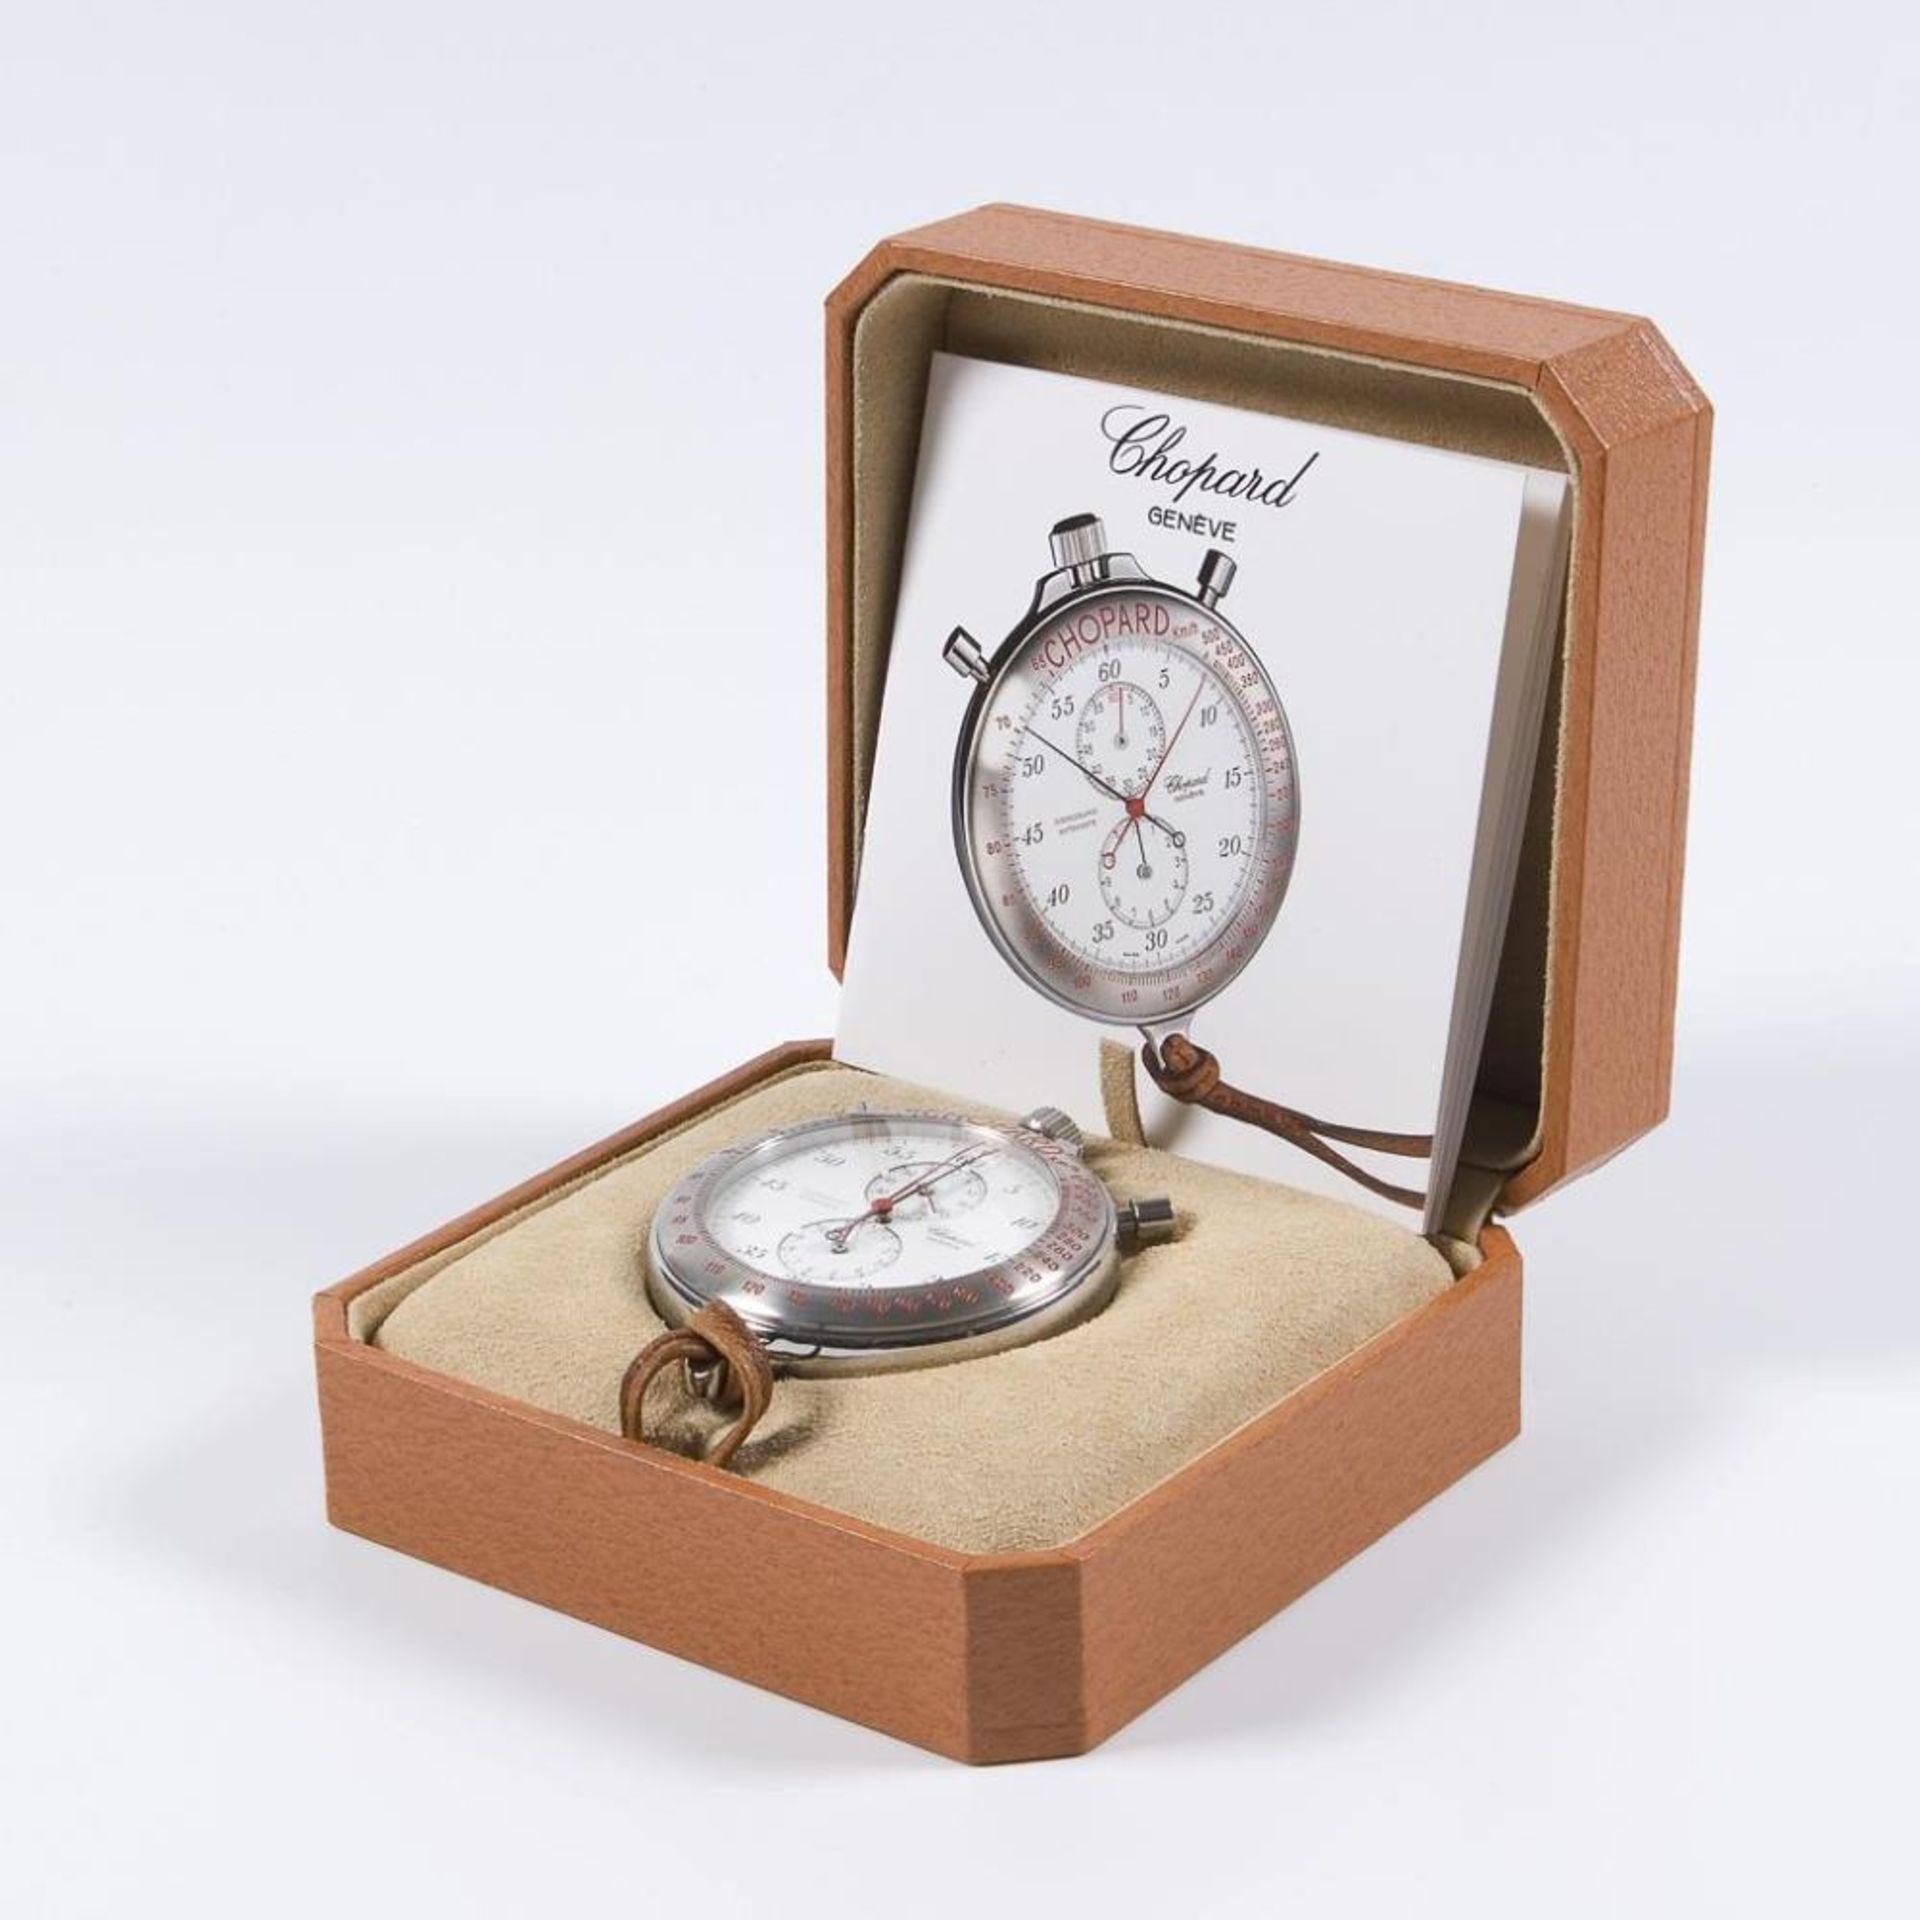 Stoppuhr-Chronograph Rattrapante.. Chopard. - Image 4 of 6